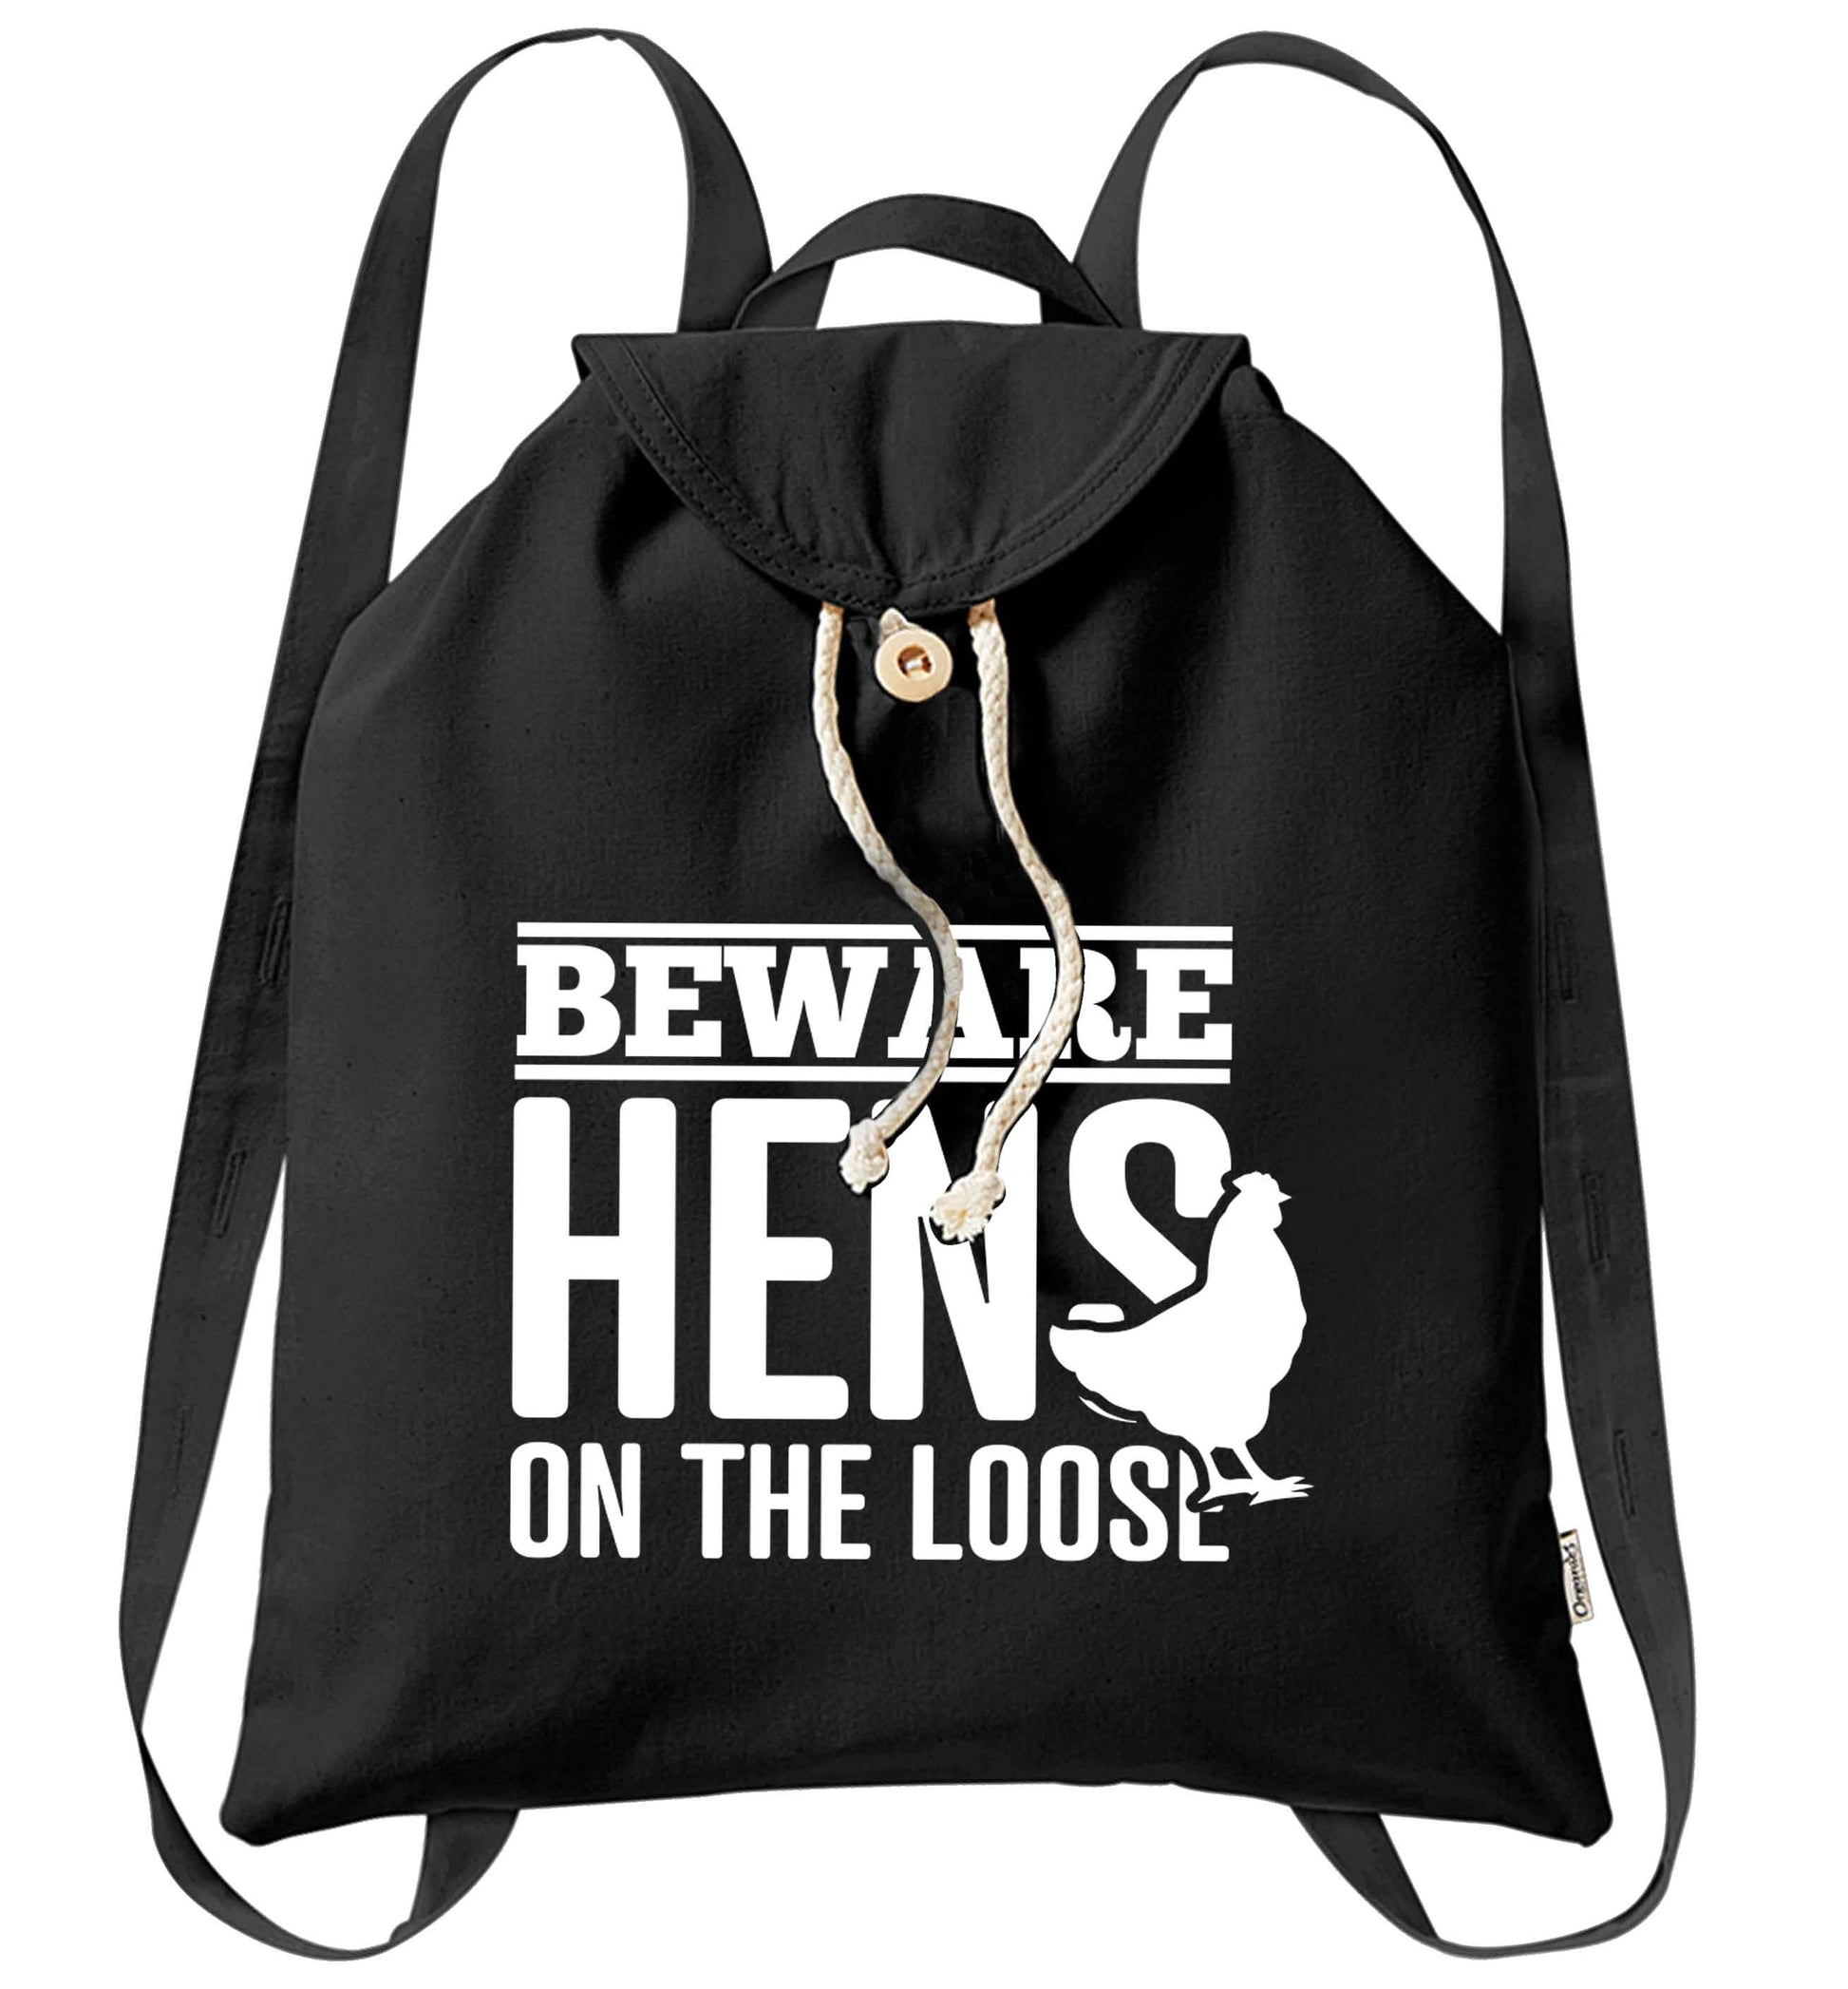 Beware hens on the loose organic cotton backpack tote with wooden buttons in black